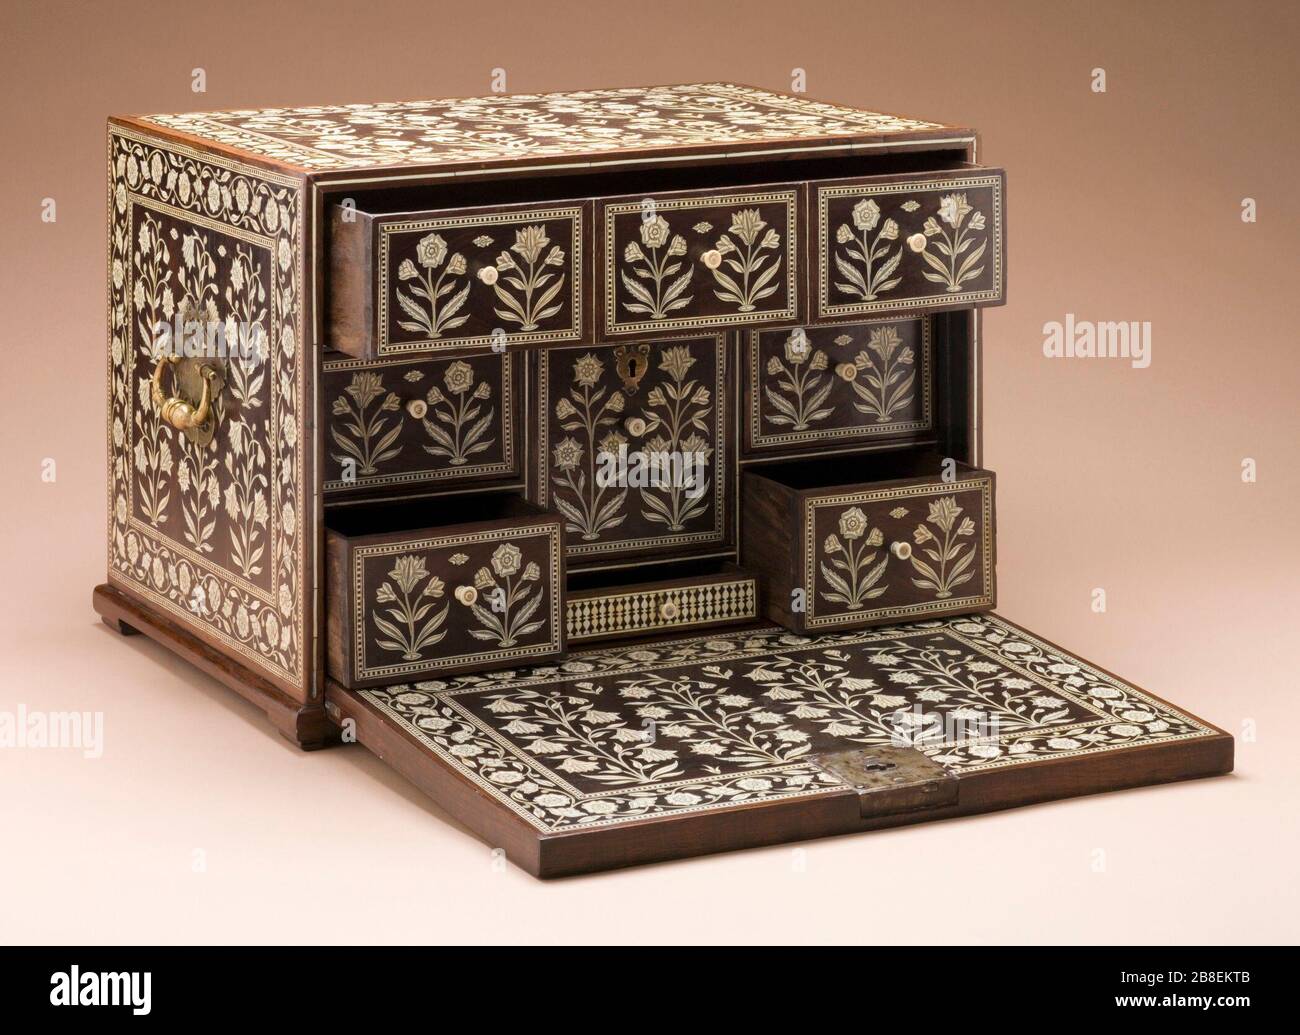 'Fall-Front Cabinet (image 16 of 22); English:  India, Gujarat or Pakistan, Sindh, circa 1650-1670 Furnishings; Furniture Rosewood inlaid with ivory; brass fittings 15 1/8 x 21 3/4 x 16 in. (38.42 x 55.25 x 40.64 cm) Purchased with funds provided by Jane and Marc Nathanson, Bill and Dee Grinnell, Greg and Mechas Grinnell, and Marilyn B. and Calvin B. Gross through the 2007 Collectors Committee (M.2007.56) South and Southeast Asian Art Currently on public view: Ahmanson Building, floor 4; between circa 1650 and circa 1670 date QS:P571,+1650-00-00T00:00:00Z/7,P1319,+1650-00-00T00:00:00Z/9,P1326, Stock Photo